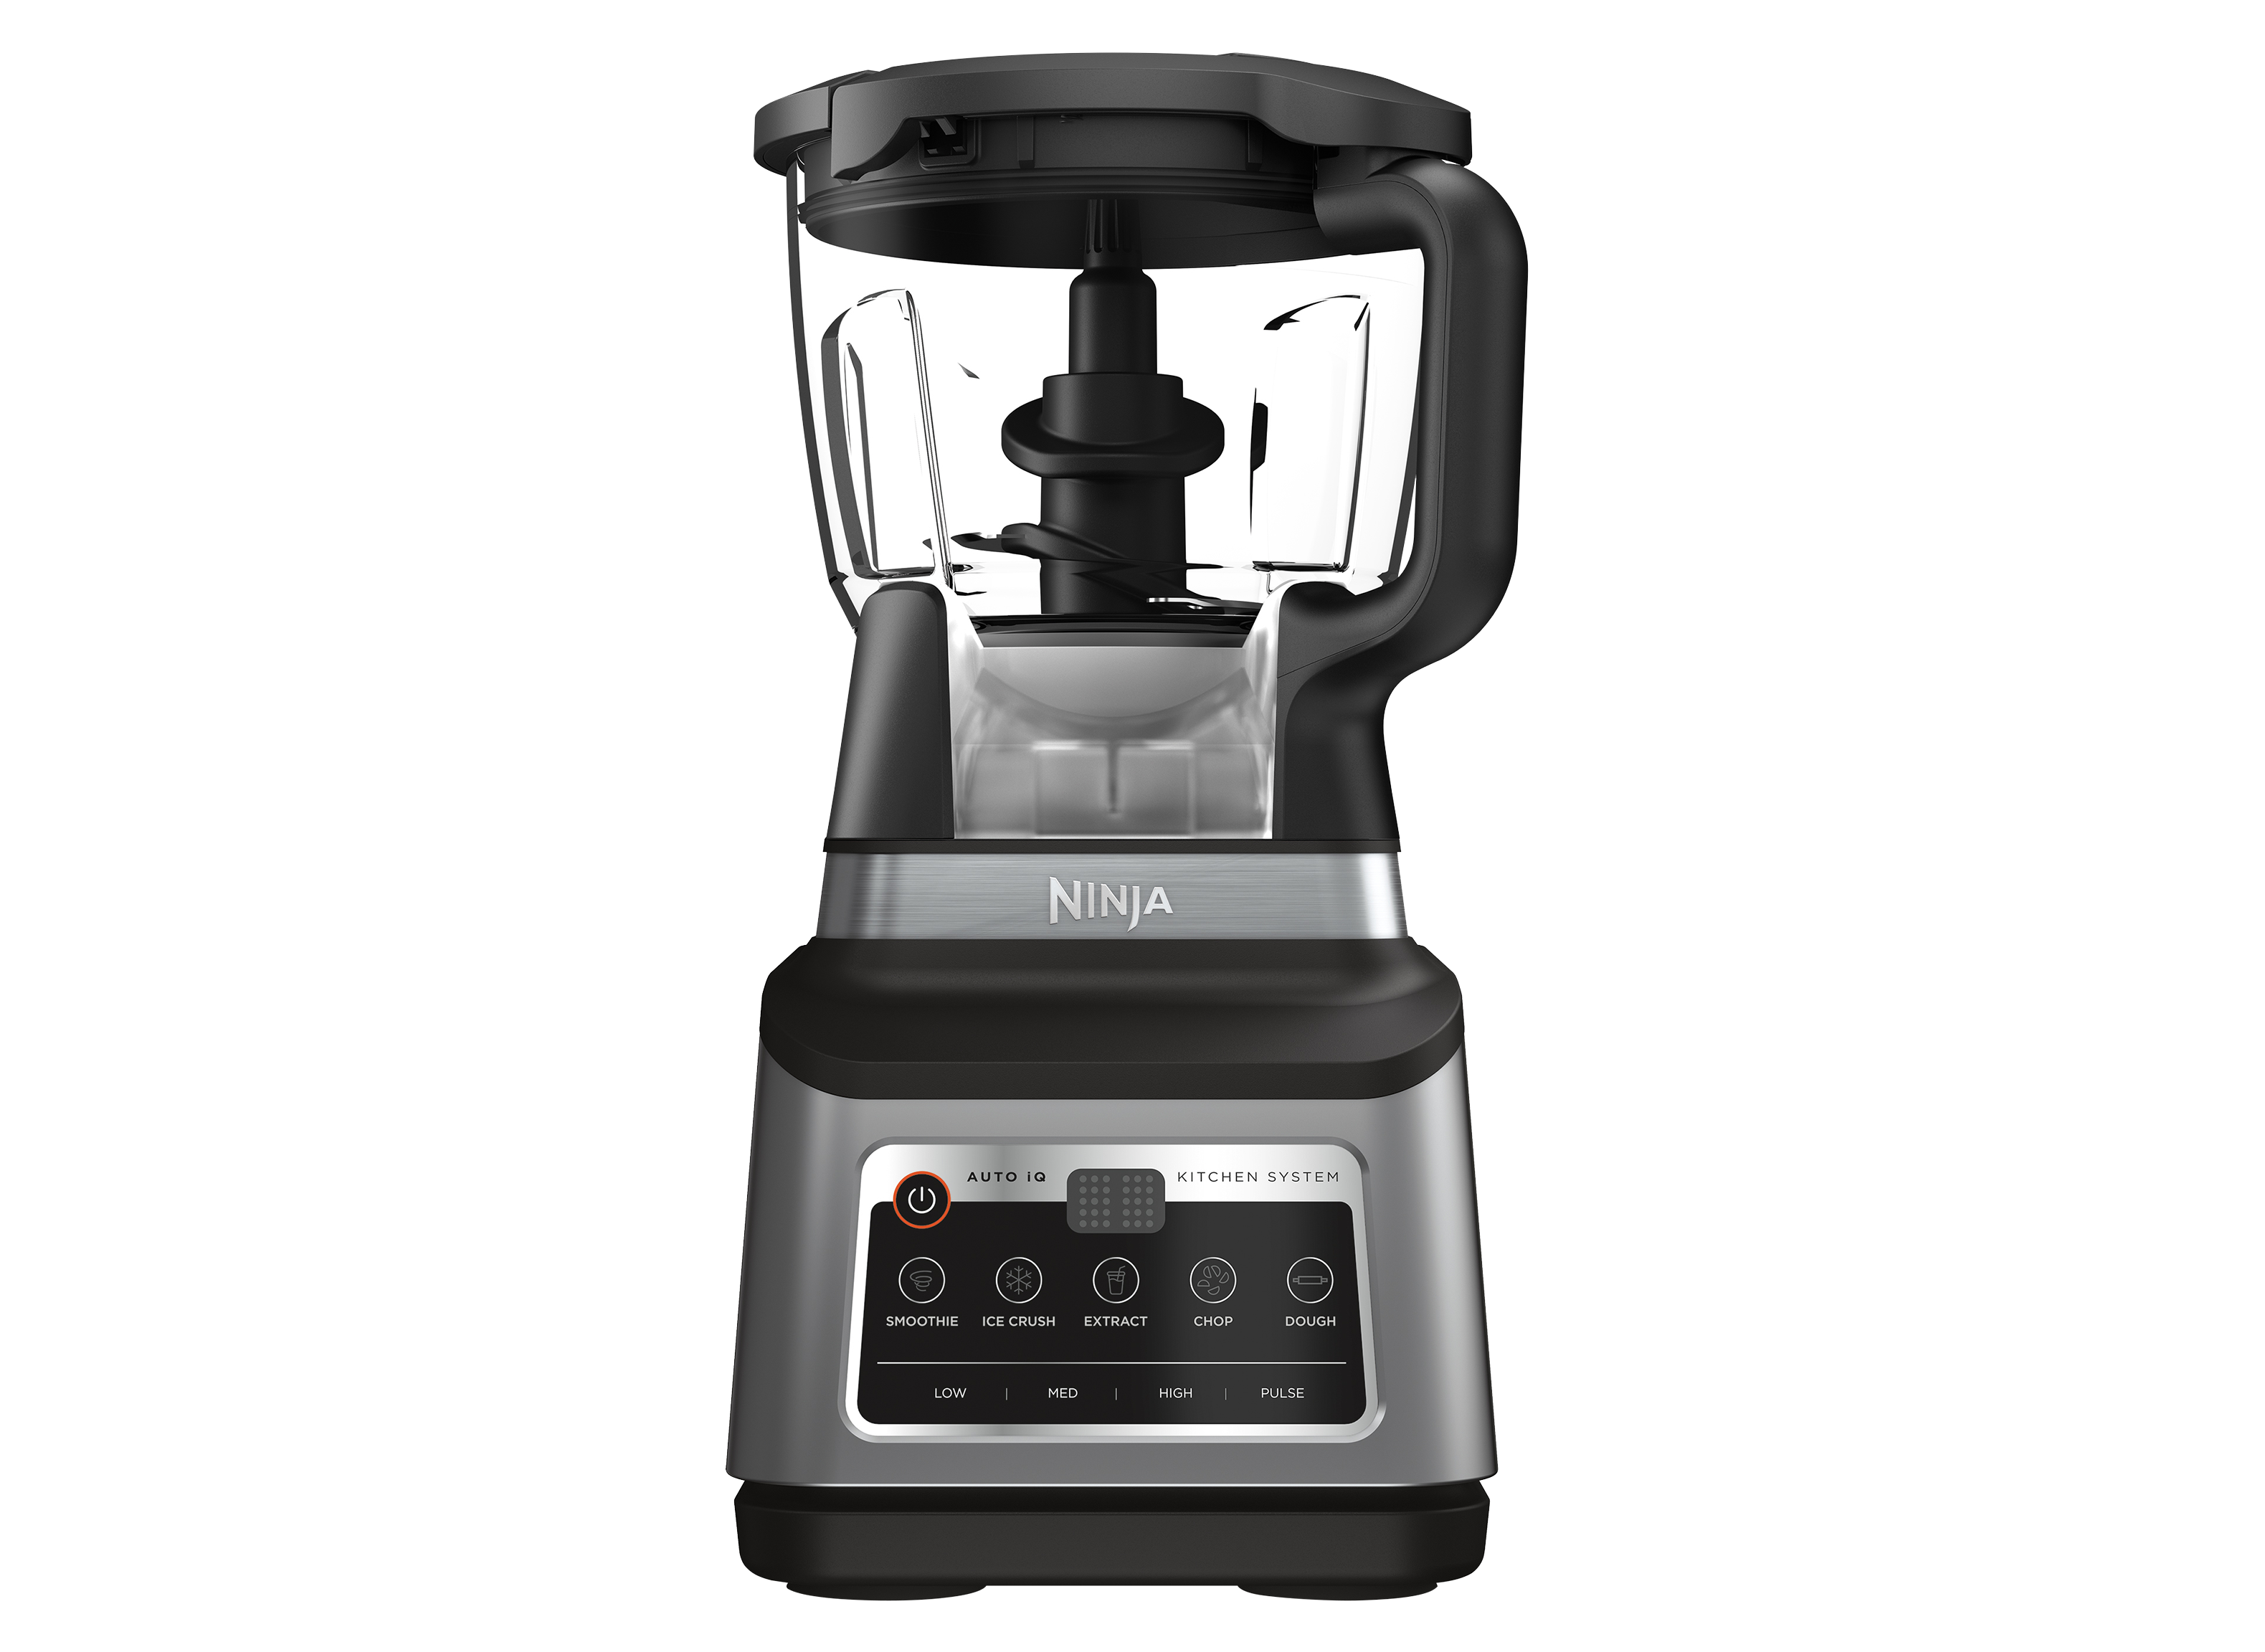 https://crdms.images.consumerreports.org/prod/products/cr/models/405214-food-choppers-ninja-professional-plus-kitchen-system-bn801-10030795.png